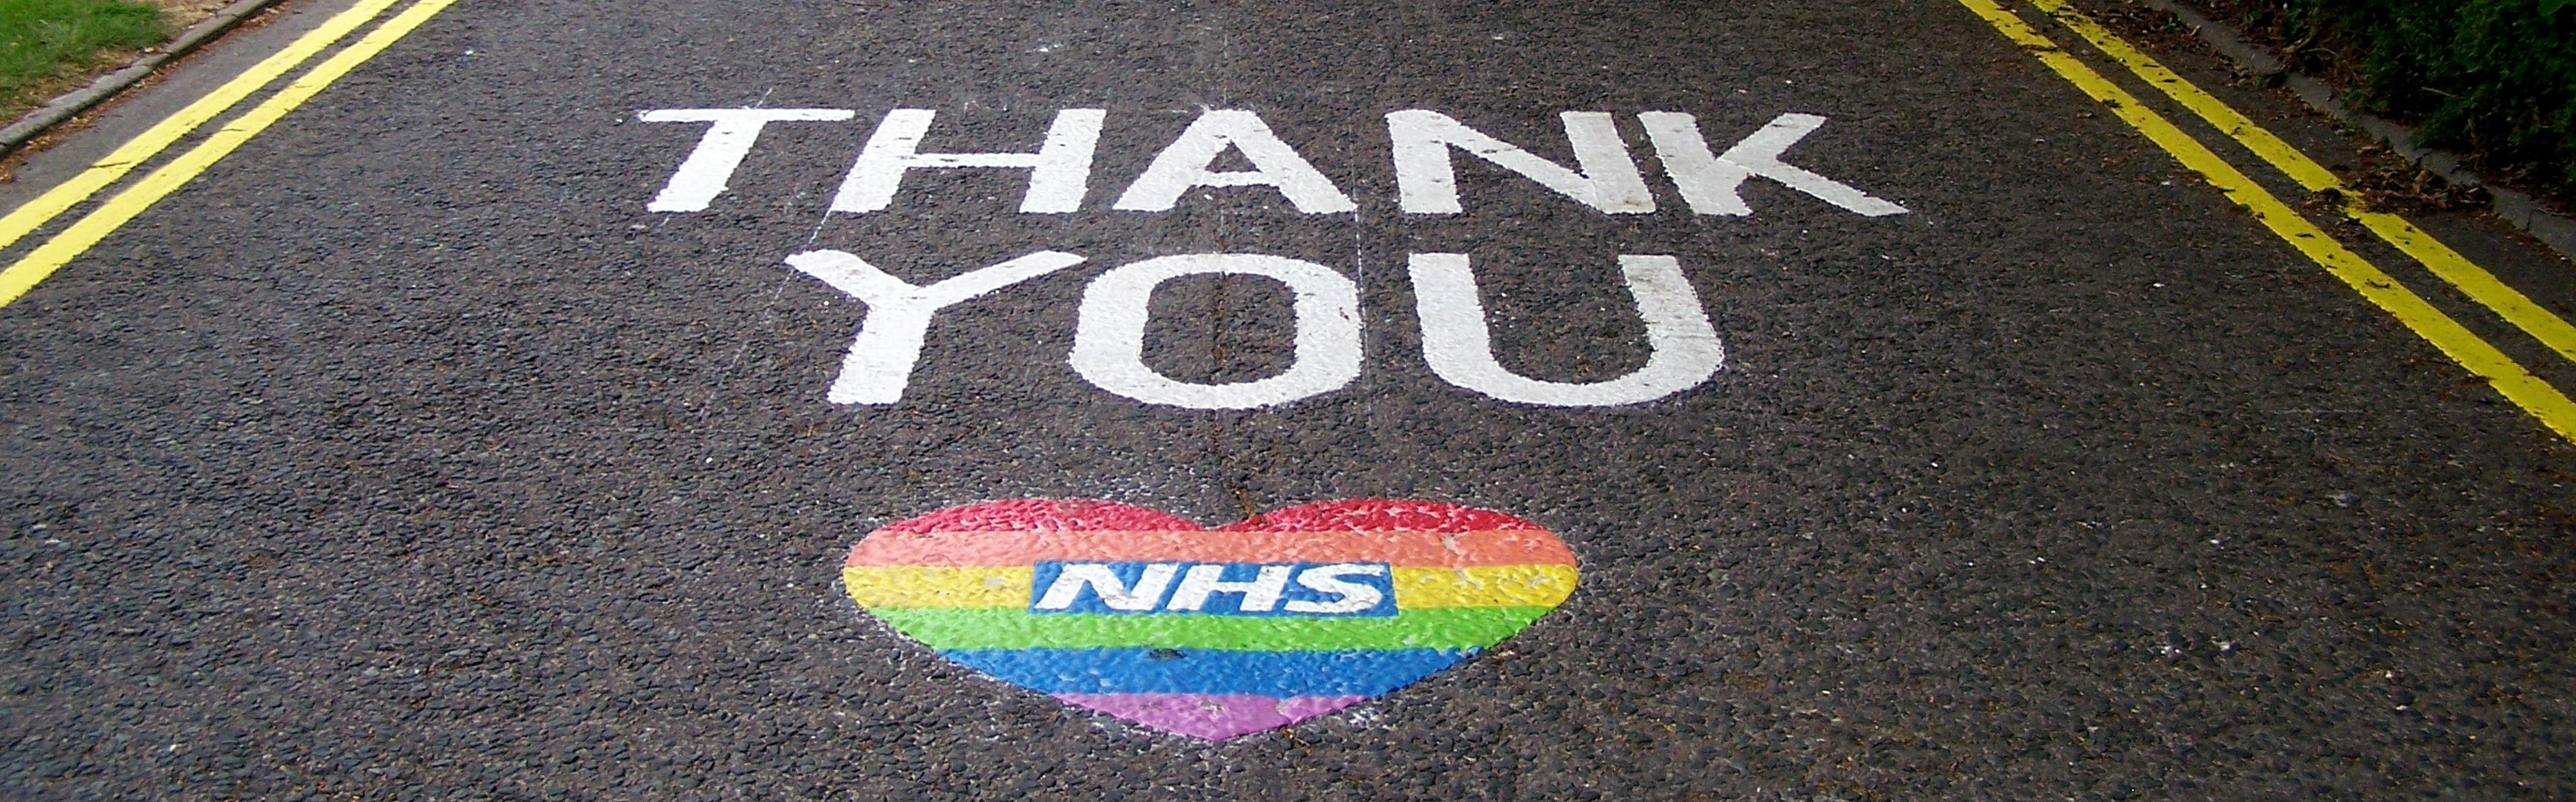 Thank you NHS started in during the COVID-19 pandemic when people in the UK posted messages of gratitude for their National Health Service (NHS), to acknowledge their crucial work. Picture adapted from an original CC-BY-SA picture of the NHS logo painted on road outside North Walsham Hospital in Norfolk, England by Whippetsgalore on Wikimedia Commons w.wiki/55Wc